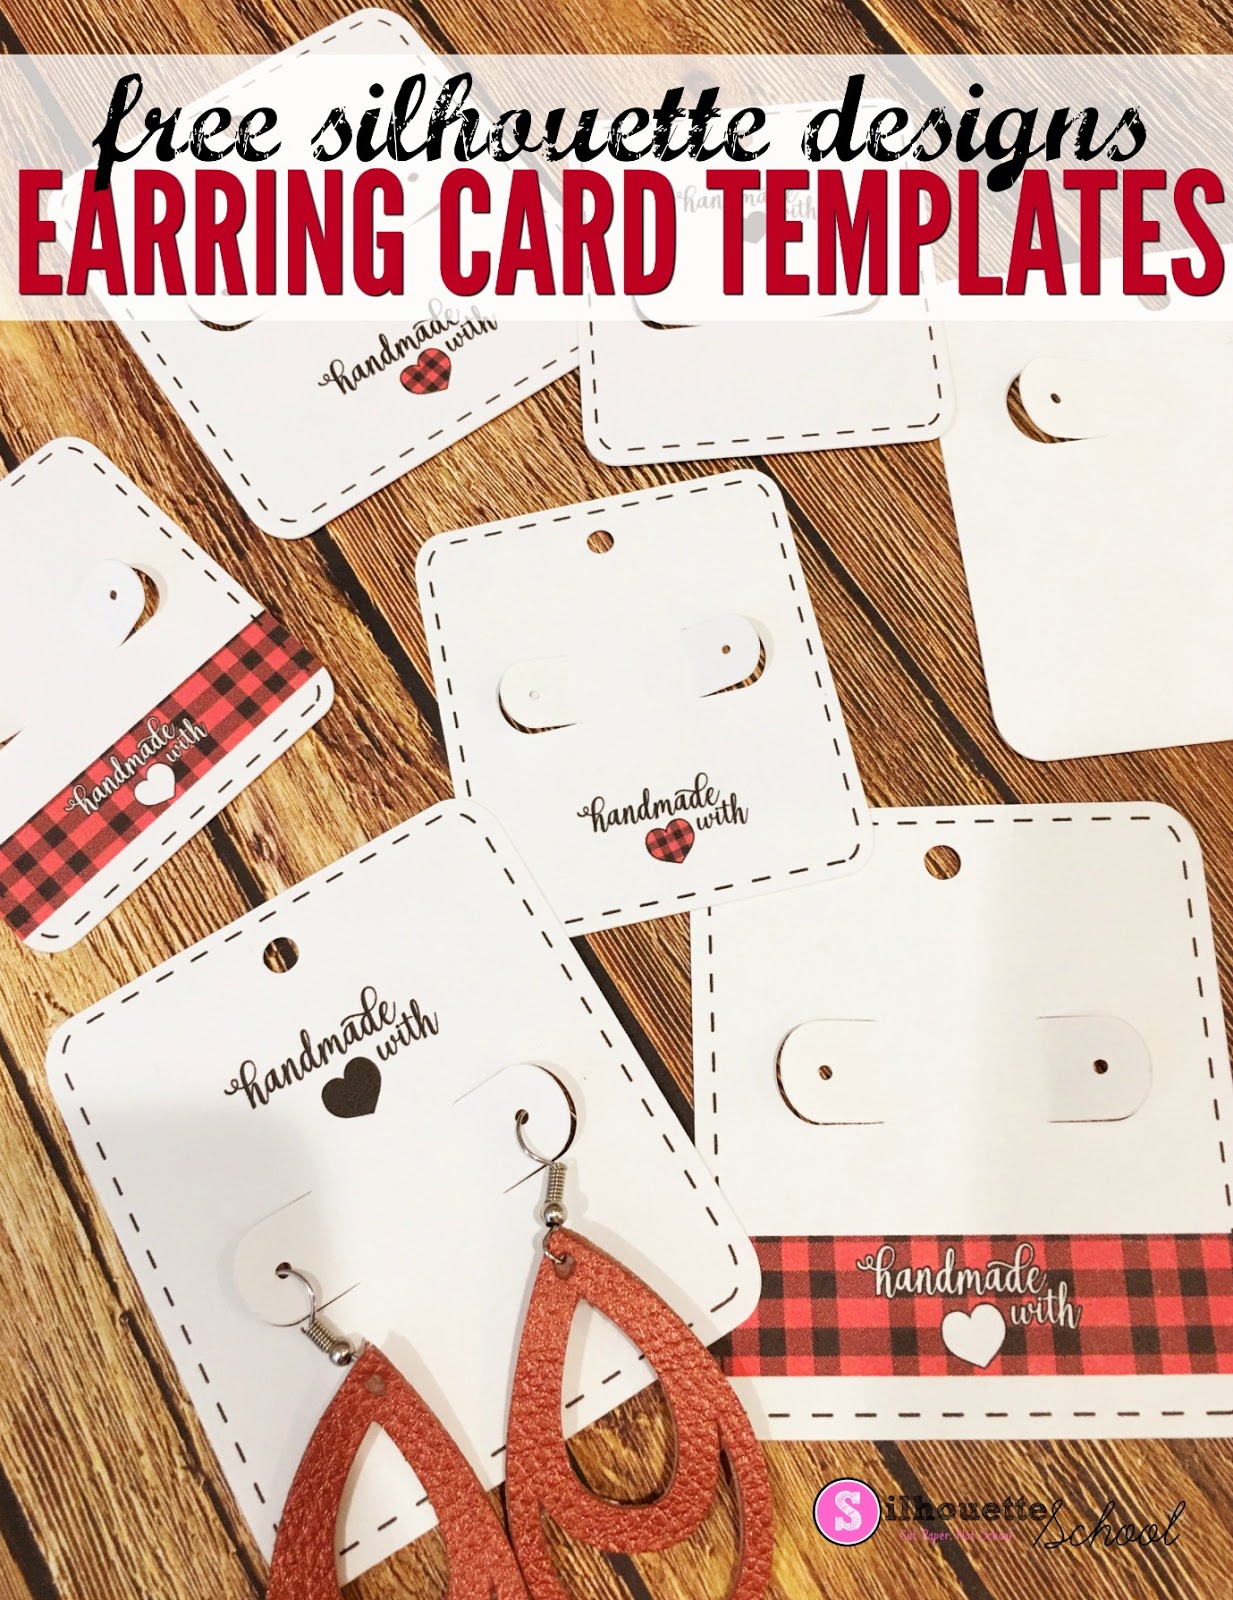 Free Silhouette Earring Card Templates (Set of 8) Silhouette School